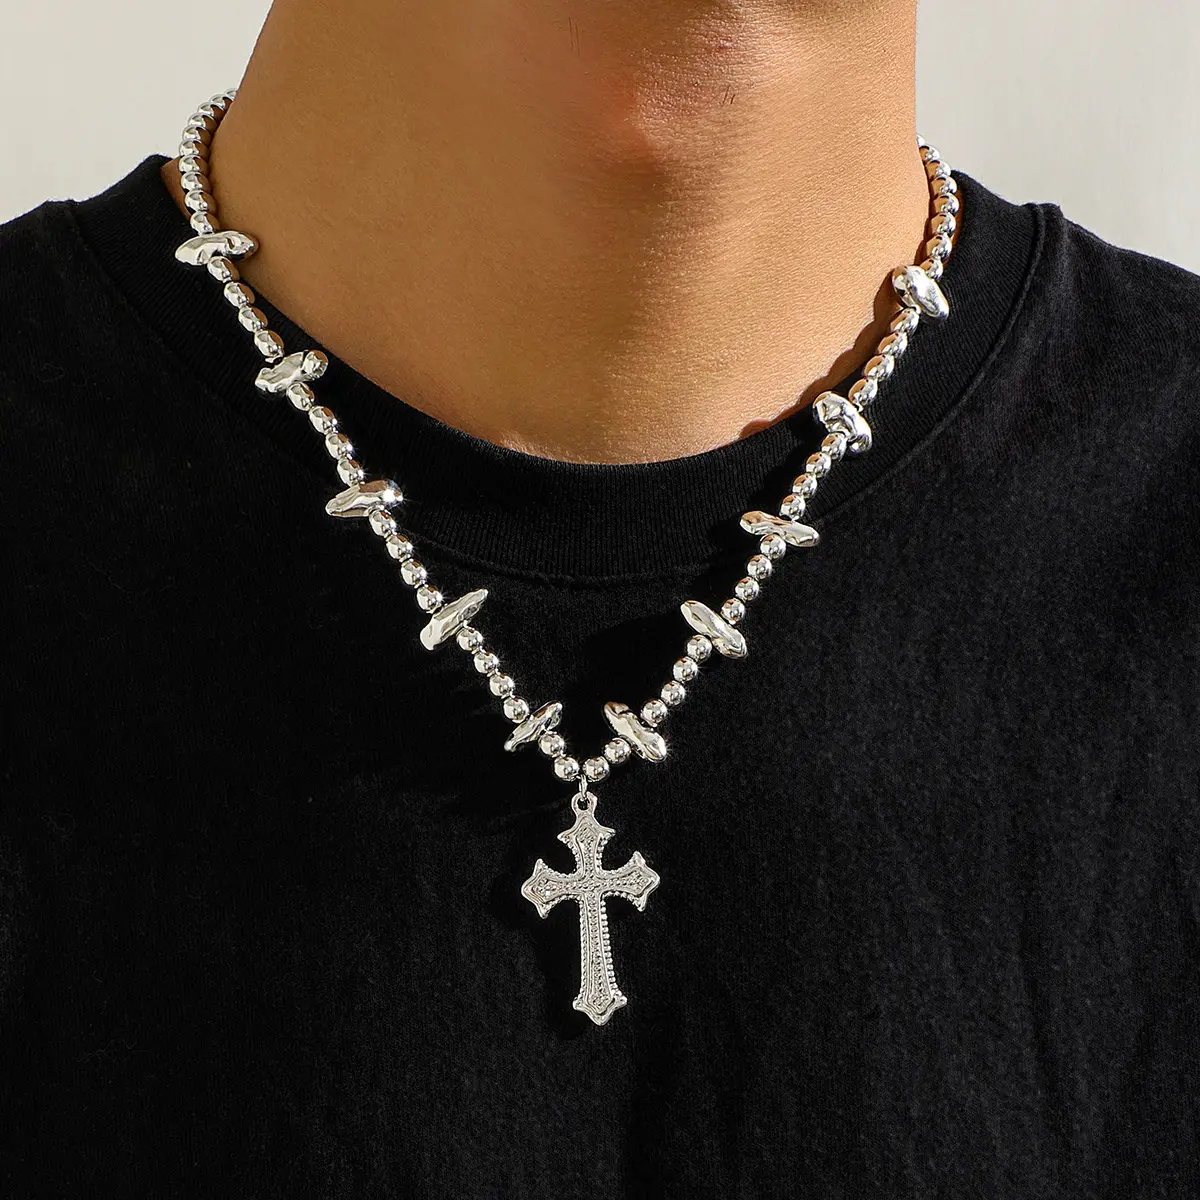 cross necklace stainless steel crucifix Pendant man necklace for men men's cross necklace